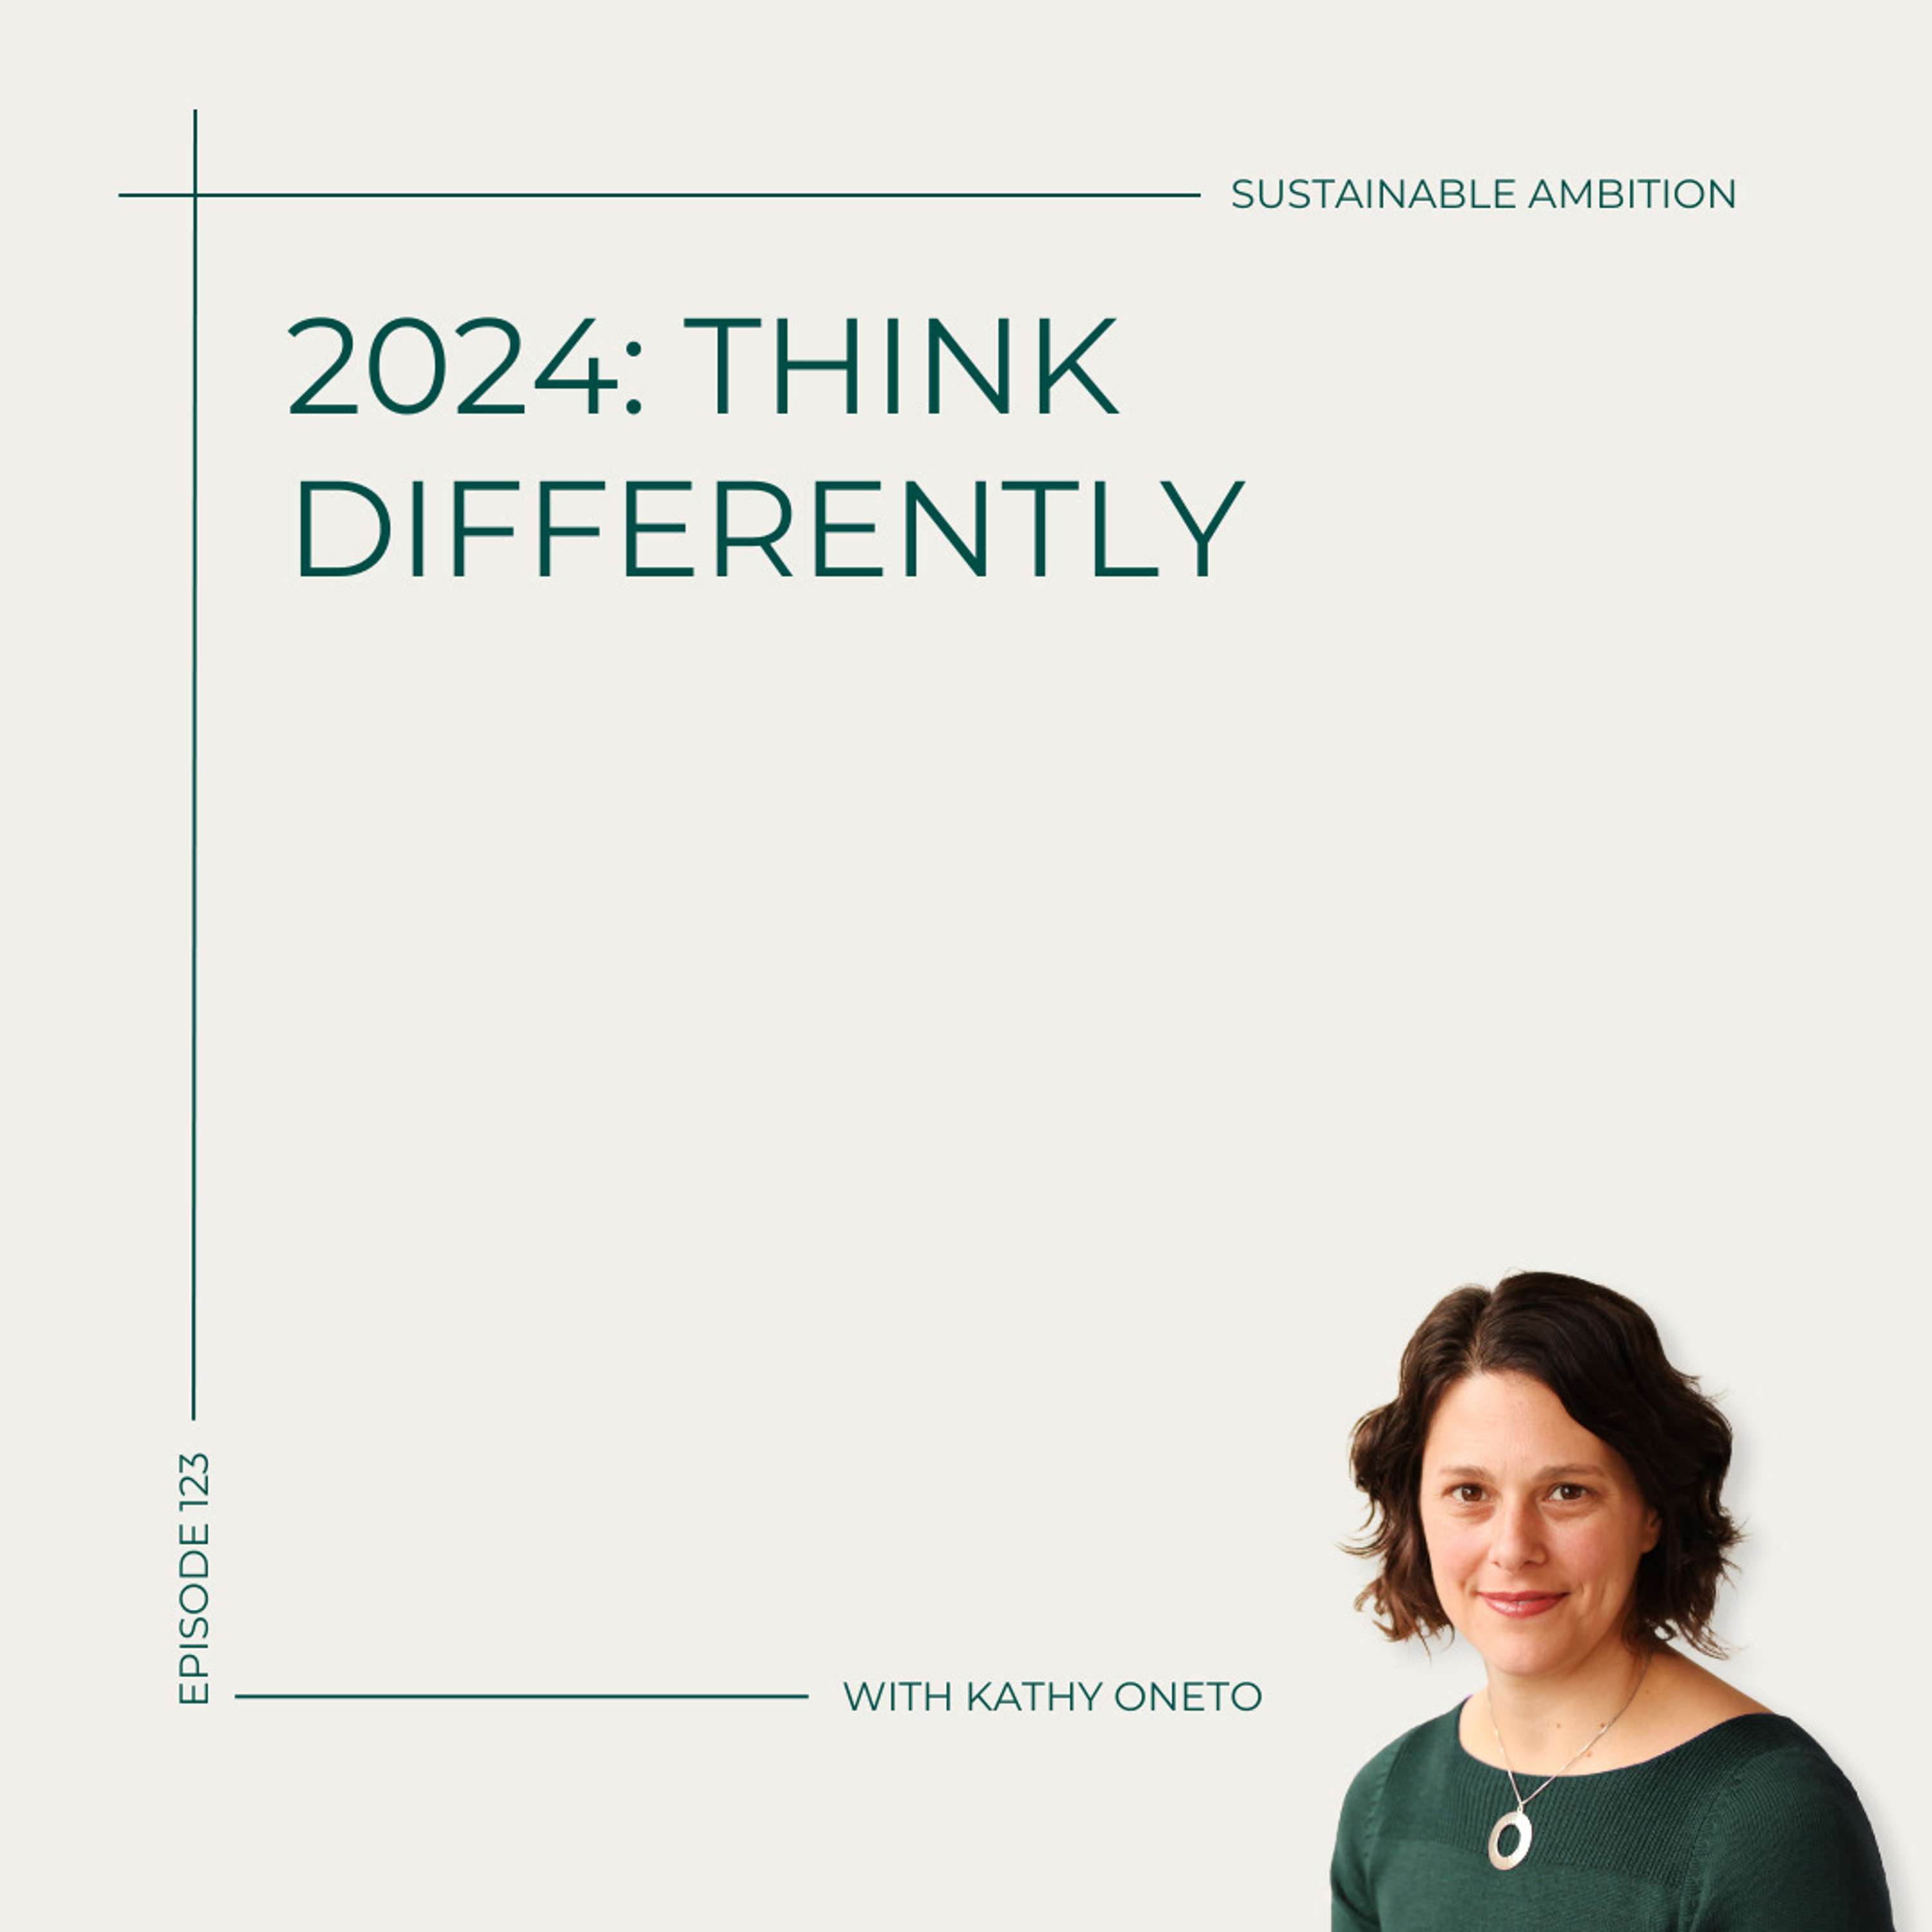 123. 2024: Think Differently